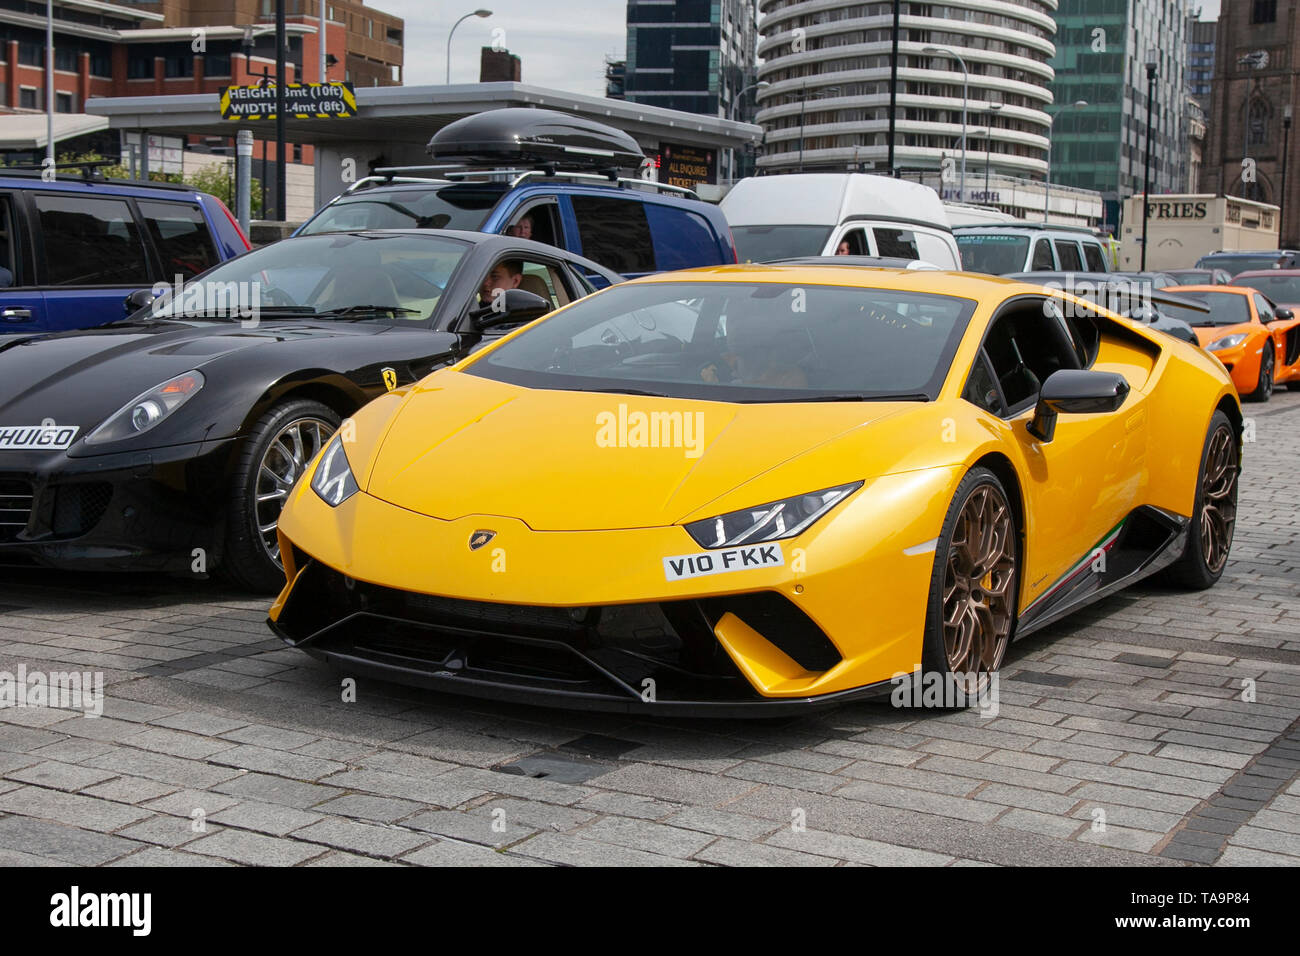 Liverpool, Merseyside. 23rd May, 2019 UK Weather: Fine, sunny sailing condition as up to 200 motorcyclists and tens of supercars including a Lamborghini Huracan Performante Lp640, queue to board the ferry to the Isle of Man to attend the island TT races.  Extra ferry services are to be added to cope with the large demand for spectators travelling to attend this year’s top motor sport week of qualifying events of the fastest road race on the planet. Credit: MediaWorldImages/AlamyLiveNews Stock Photo